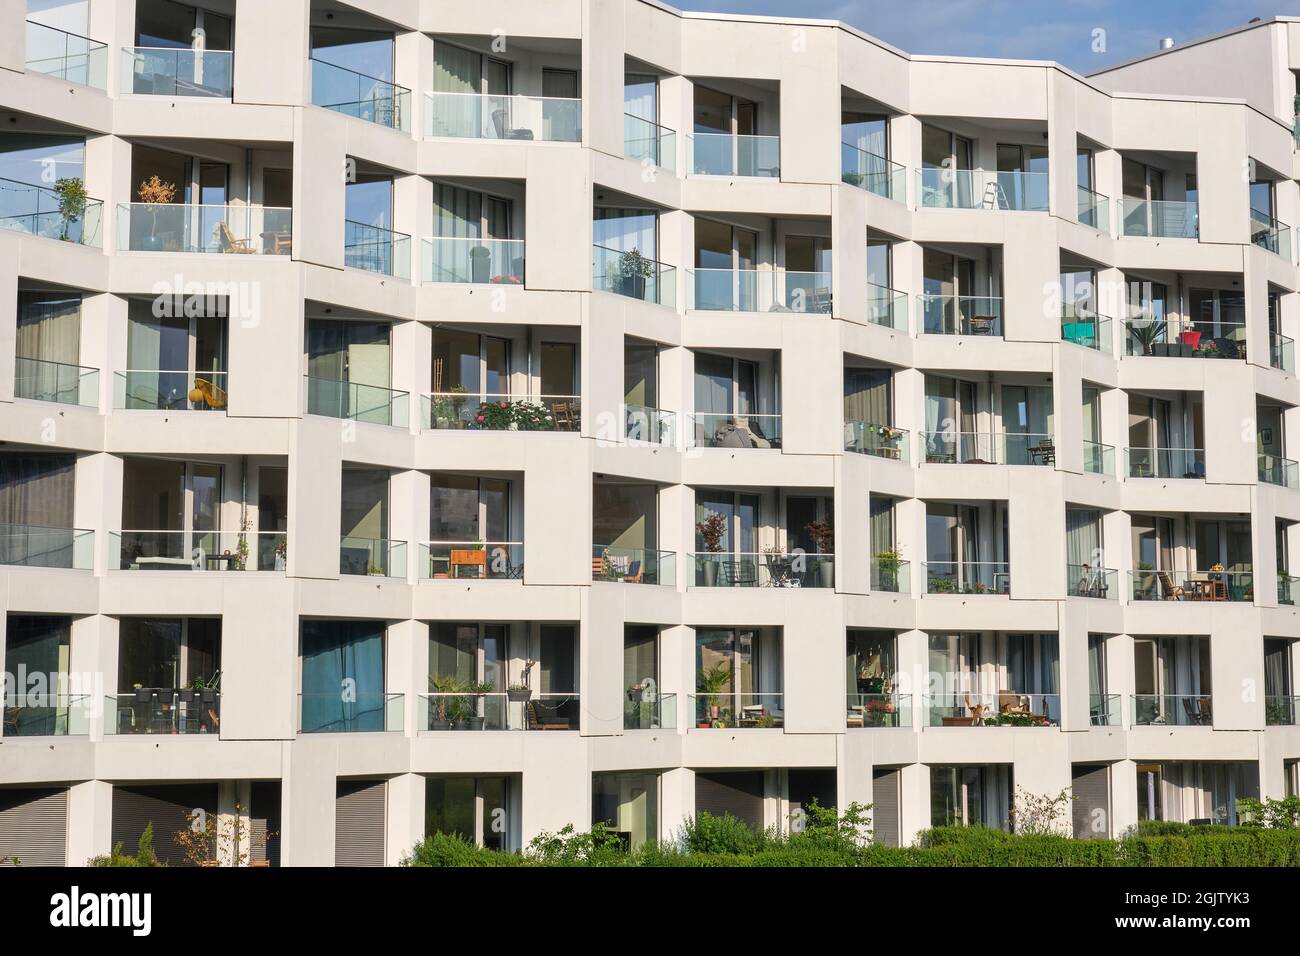 New multi-family apartment building seen in downtown Berlin, Germany Stock Photo